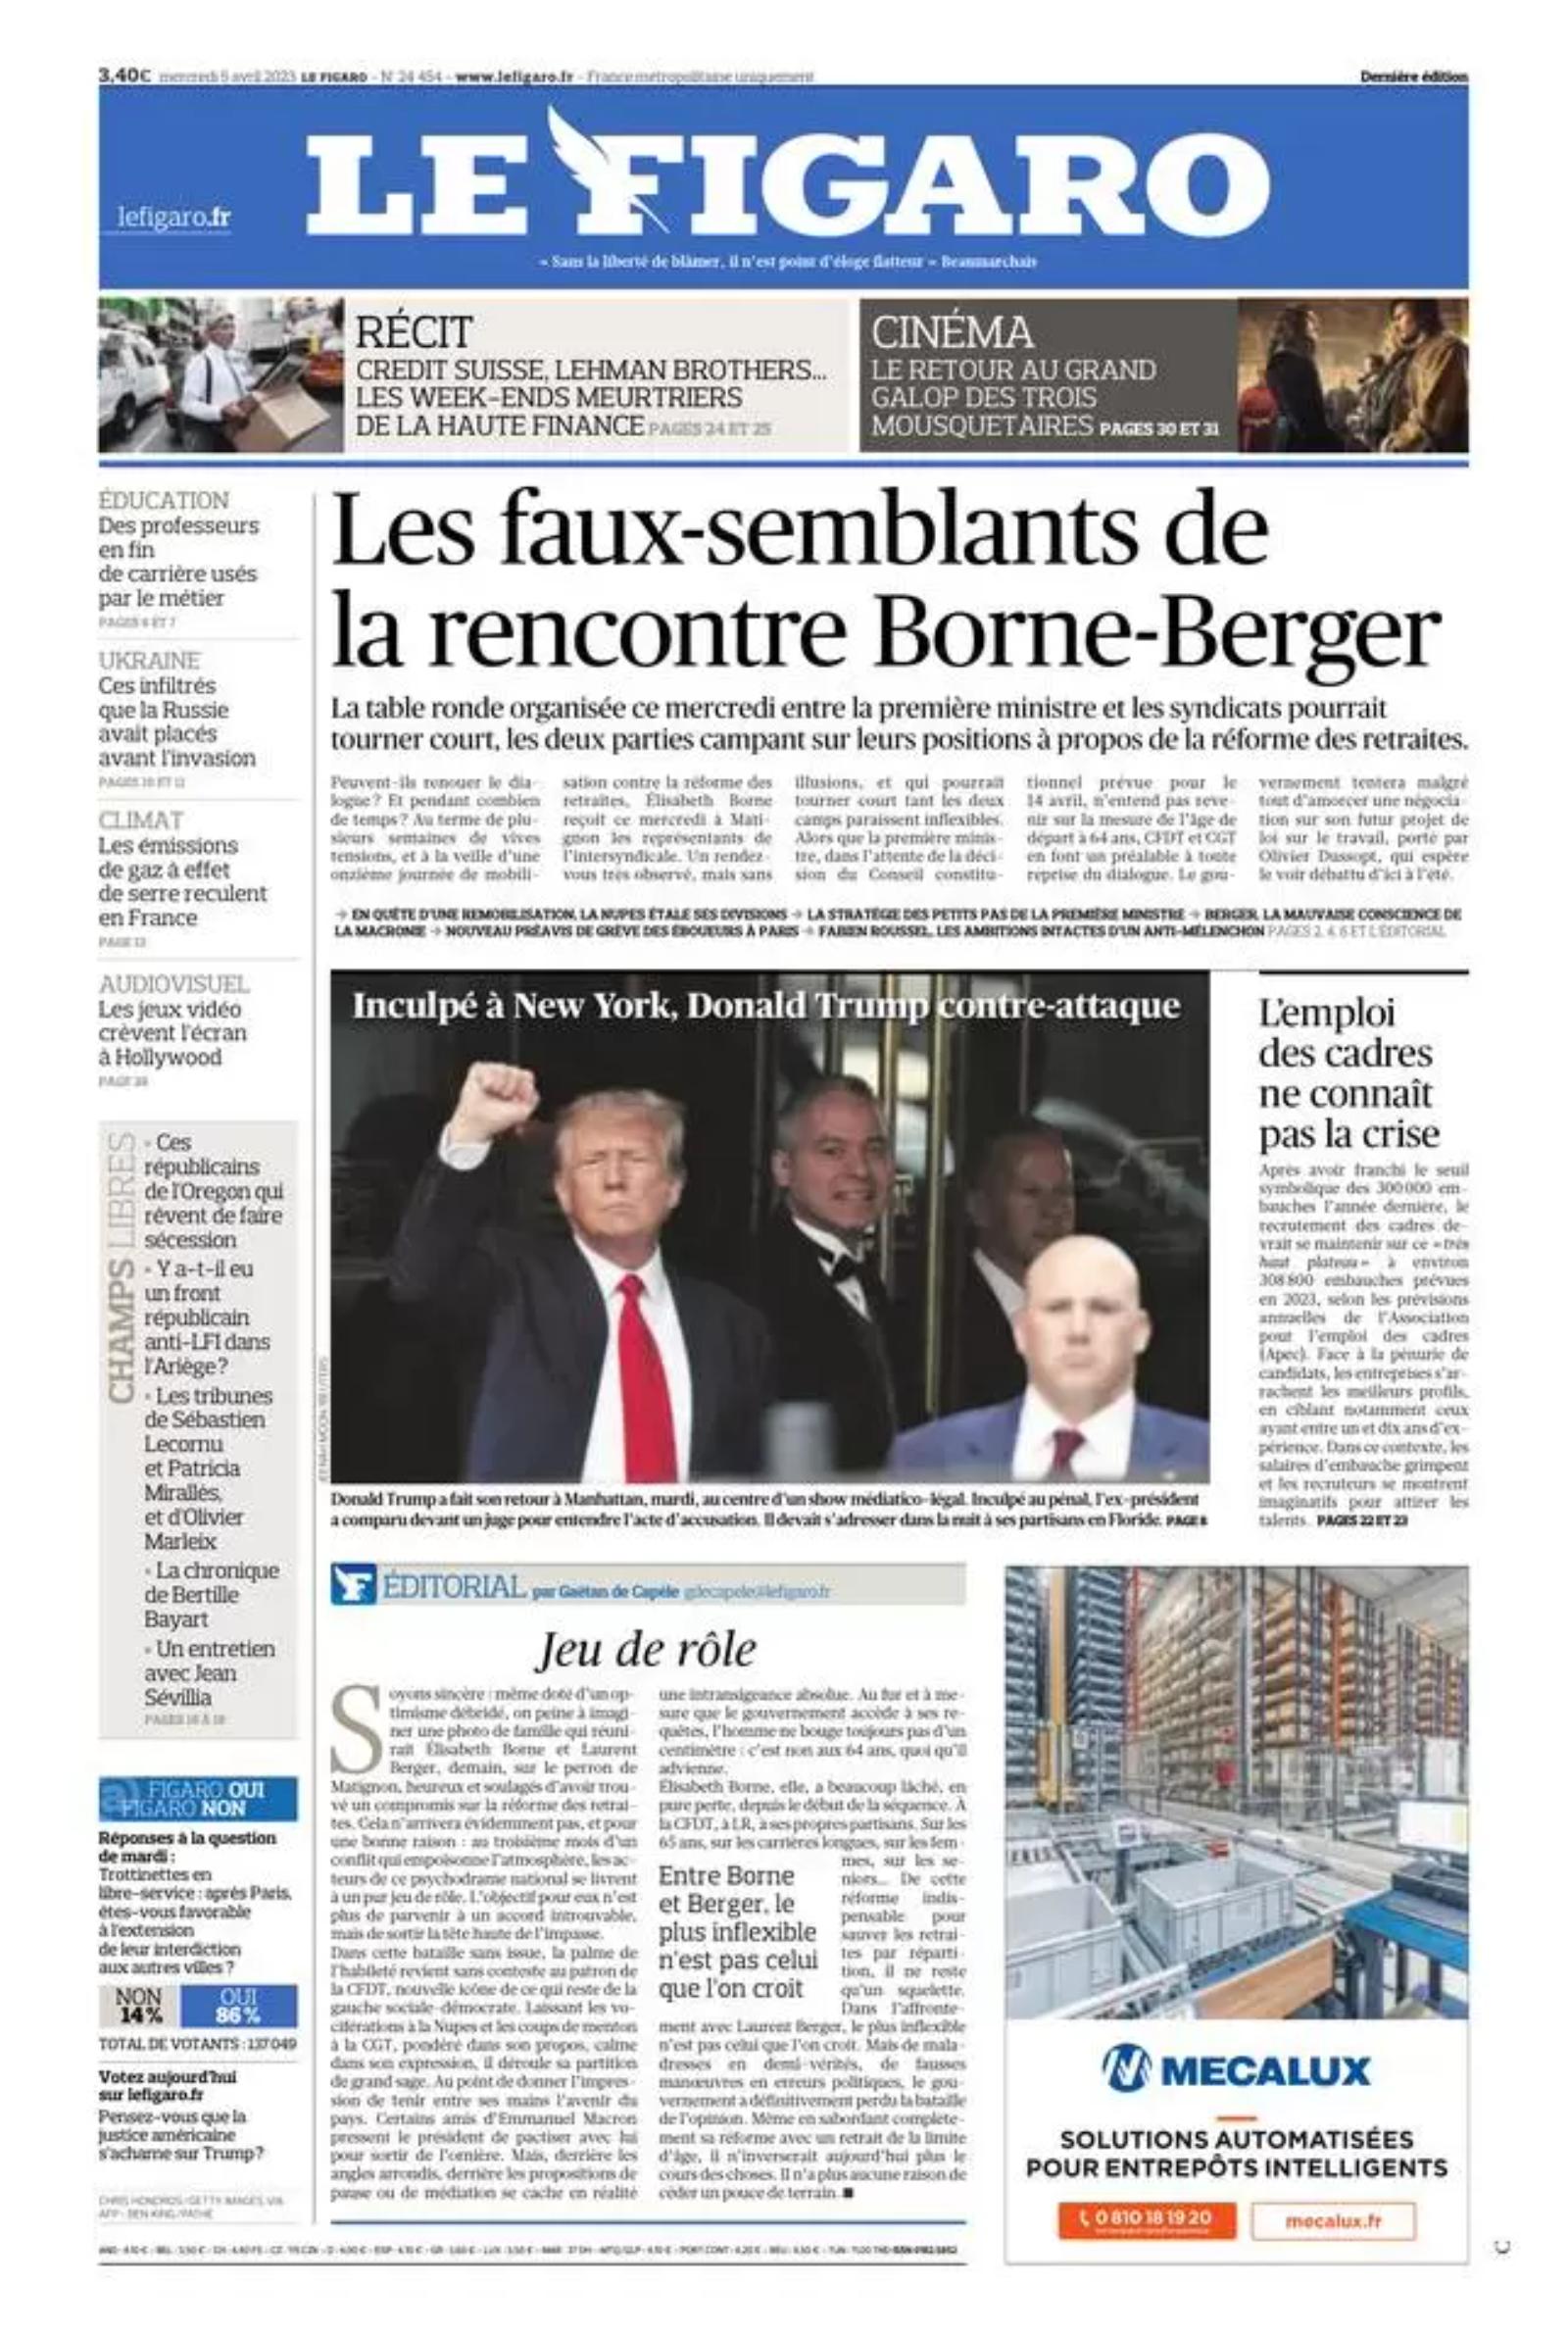 The front page of Le Figaro, April 5 2023.